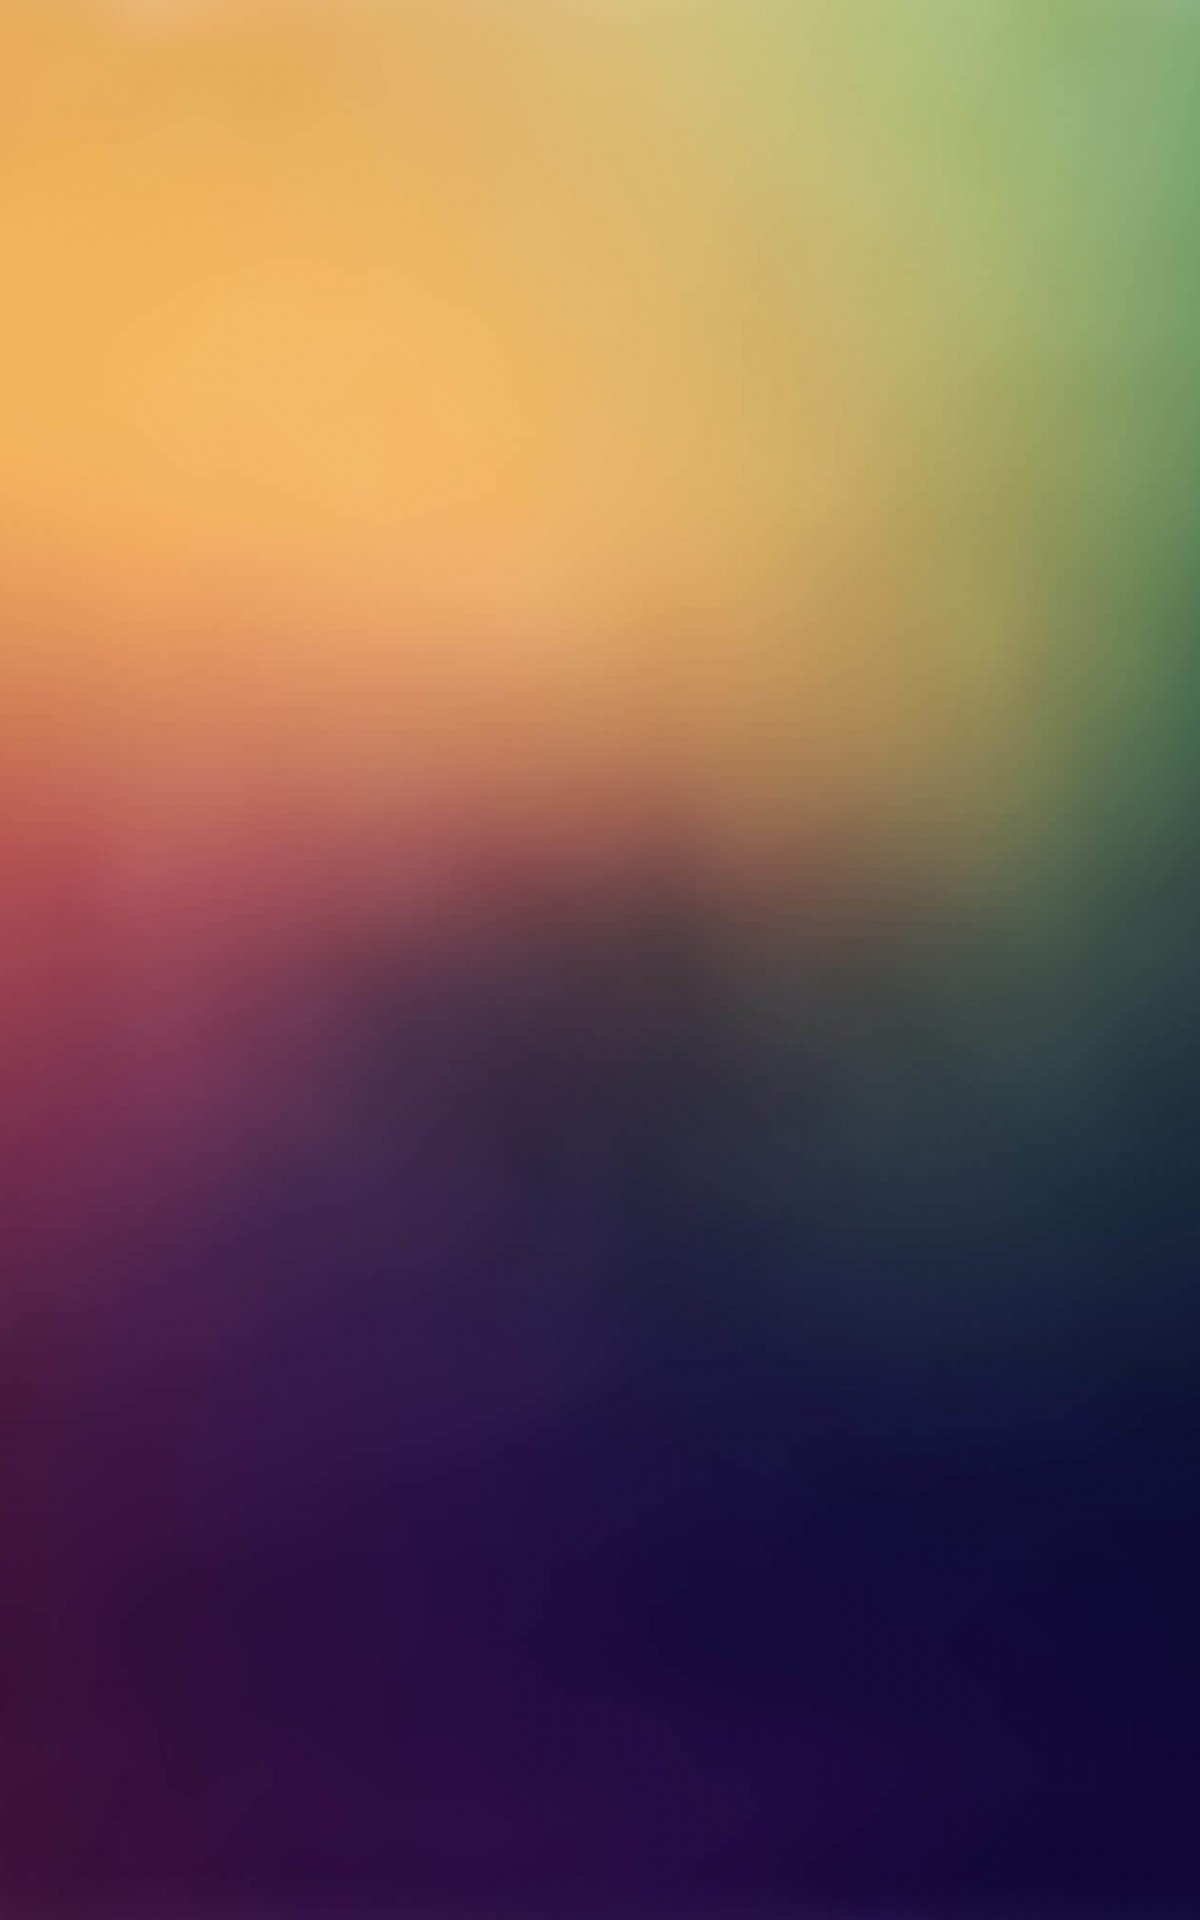 Blurred Rainbow Wallpaper for Amazon Kindle Fire HDX